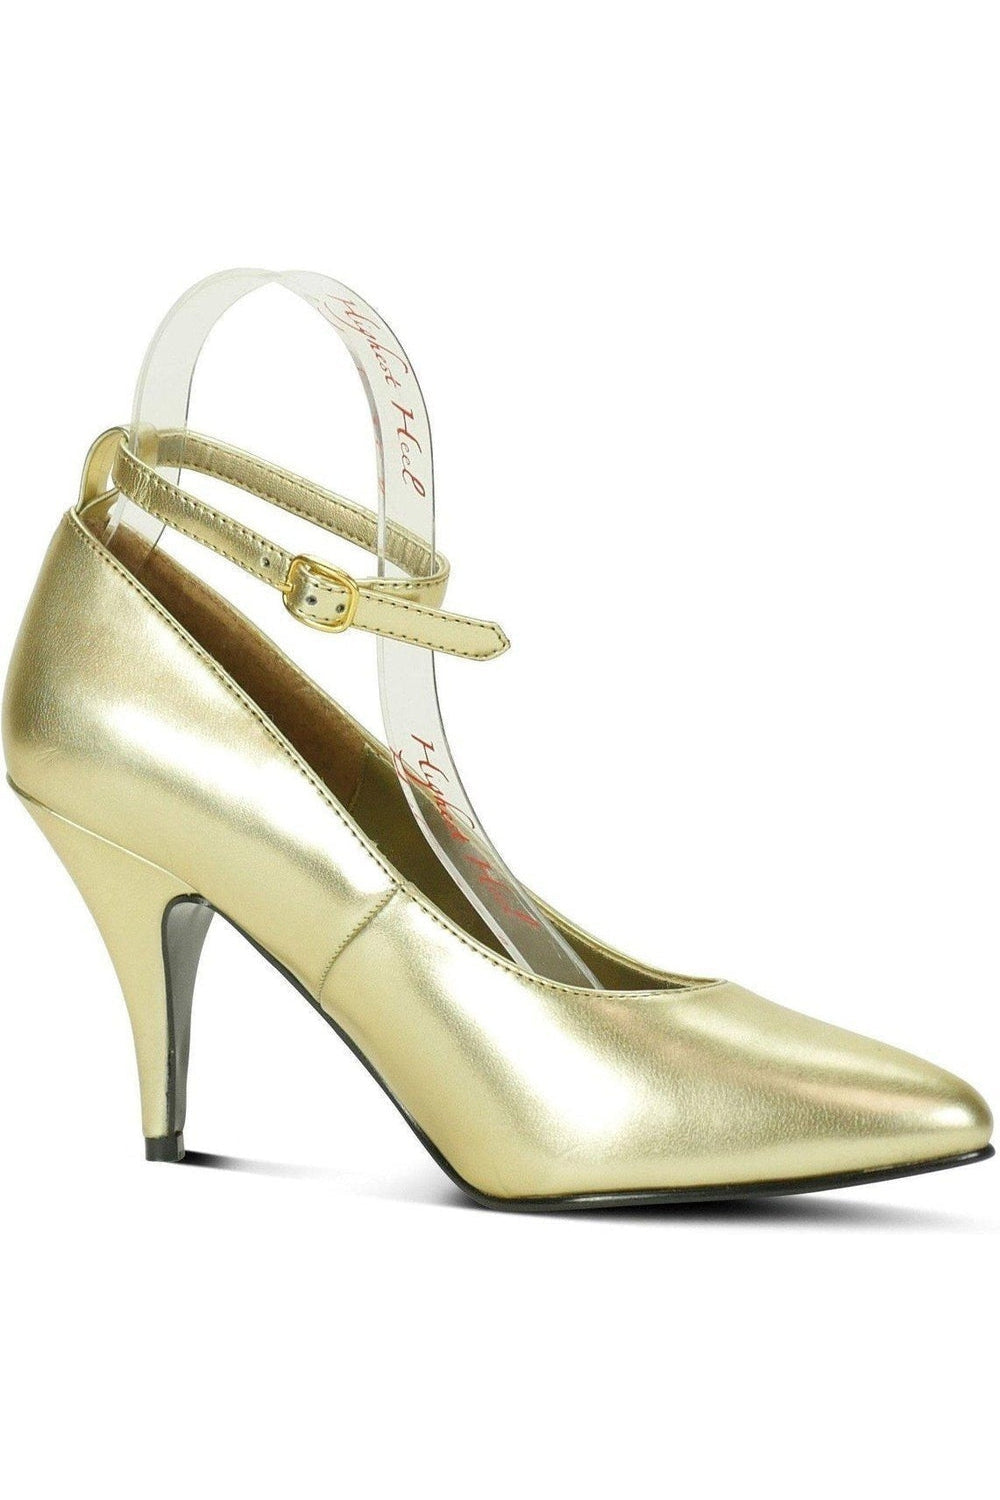 Ankle Strap - Gold-Sexyshoes Brand-GOLD-Pumps-SEXYSHOES.COM